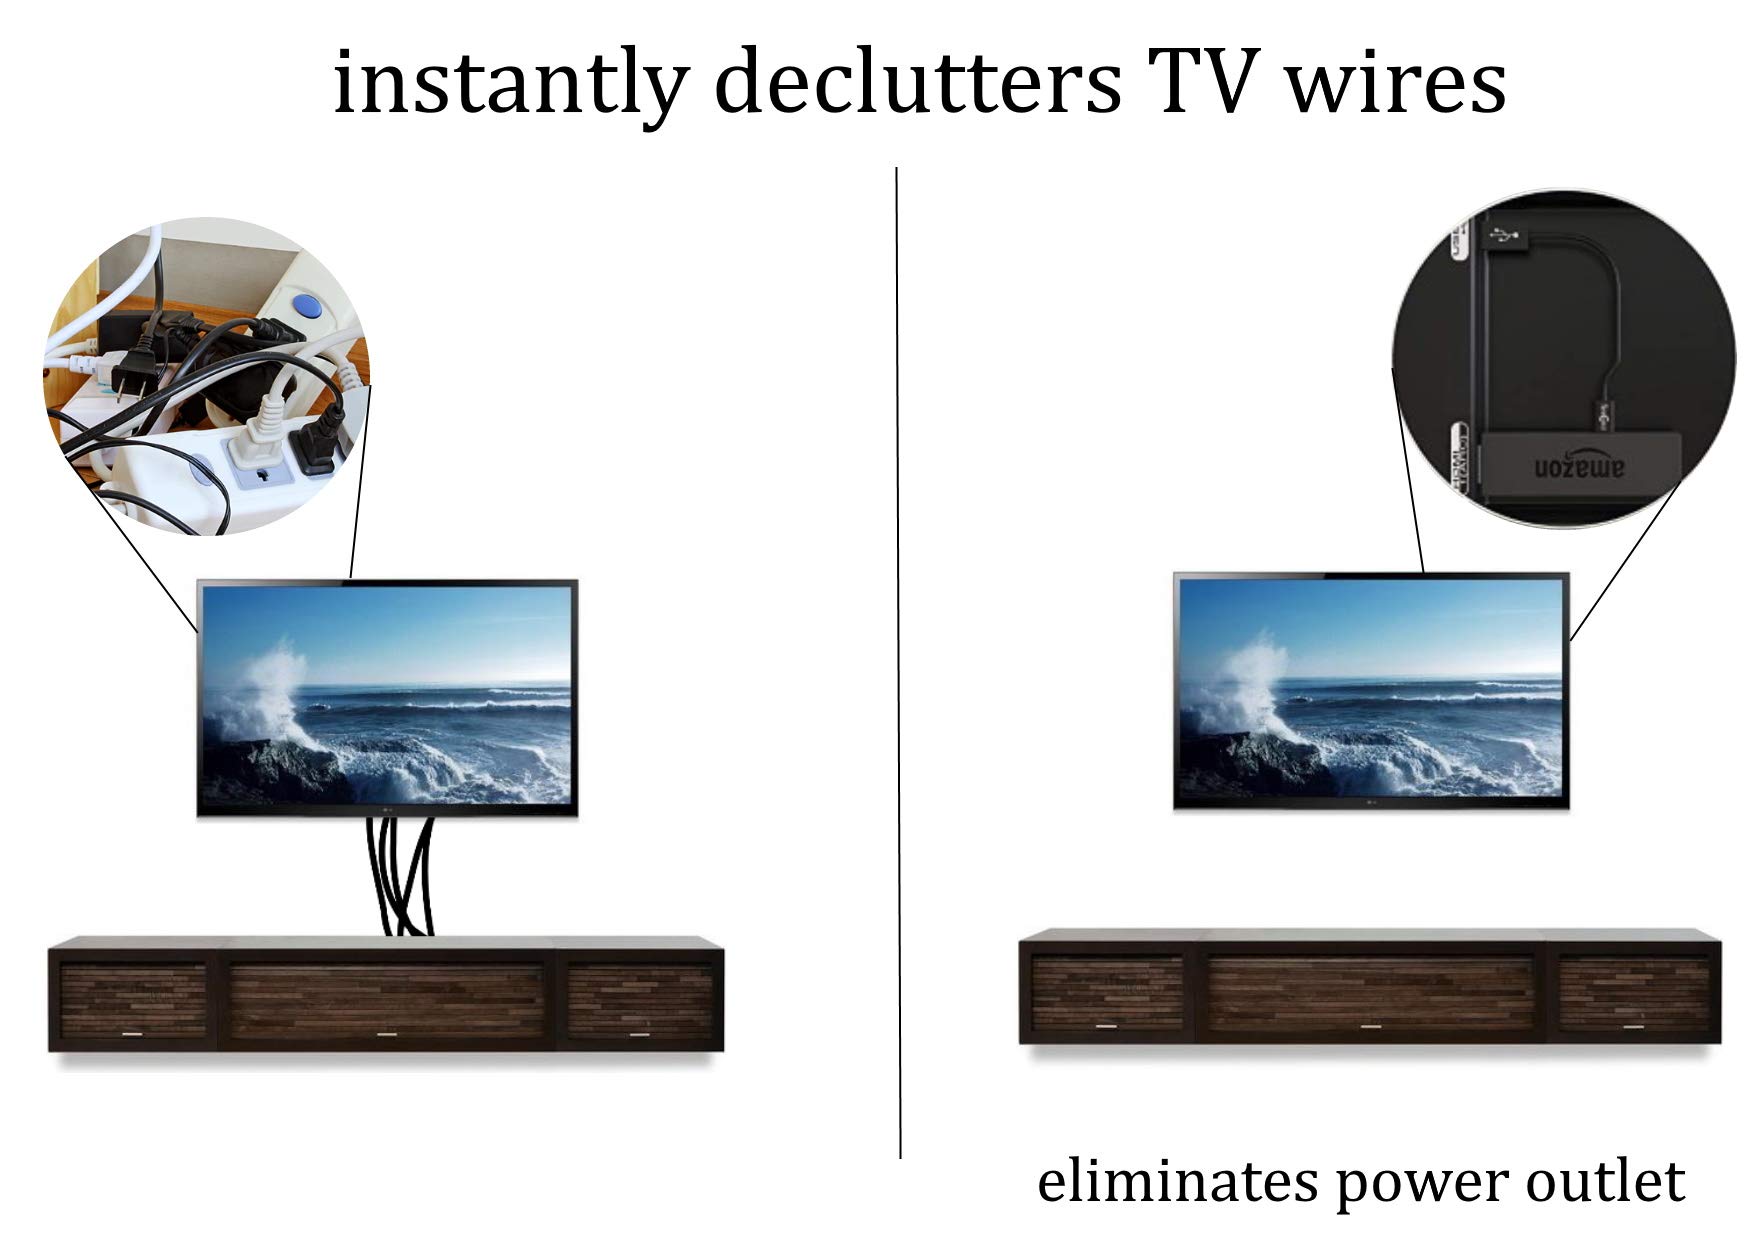 fireCable Wireless Adapter for Firestick | Declutters TV Wires & Eliminates AC Outlet (No Software Required, Installs in Seconds)